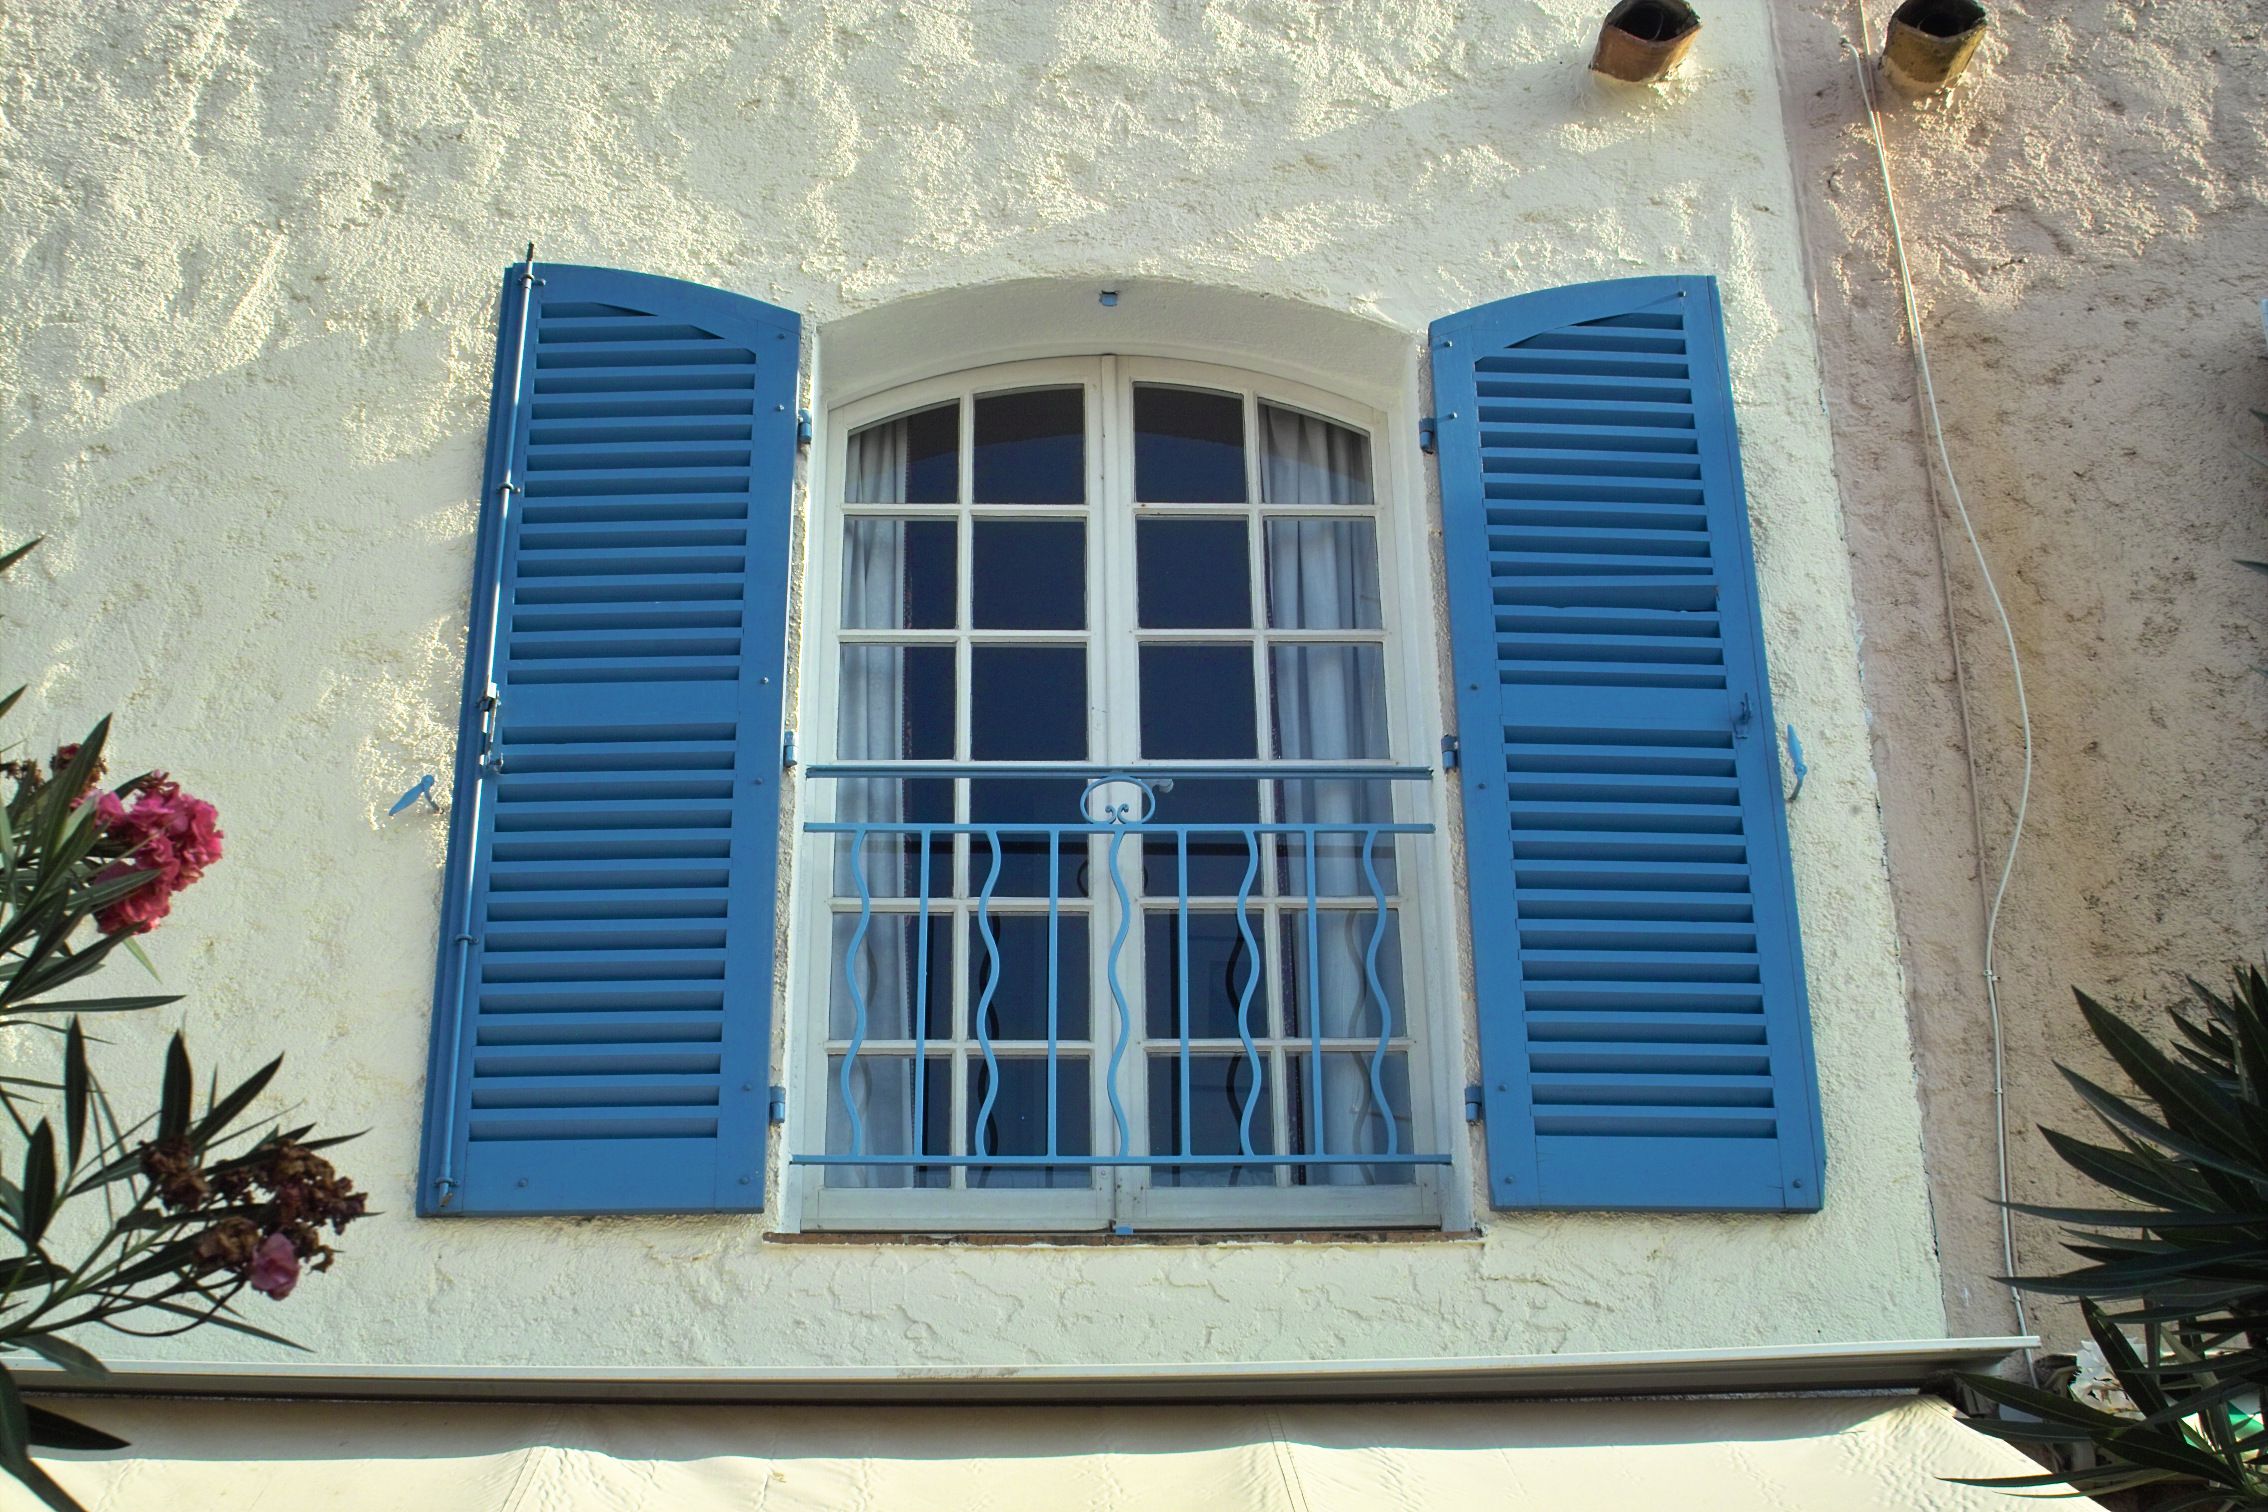 Exterior Window Blue Attractive Exterior Window Shutters In Blue Color And French Design For White Arched Windows Exterior Exterior Window Shutters With Maximum Functional Features